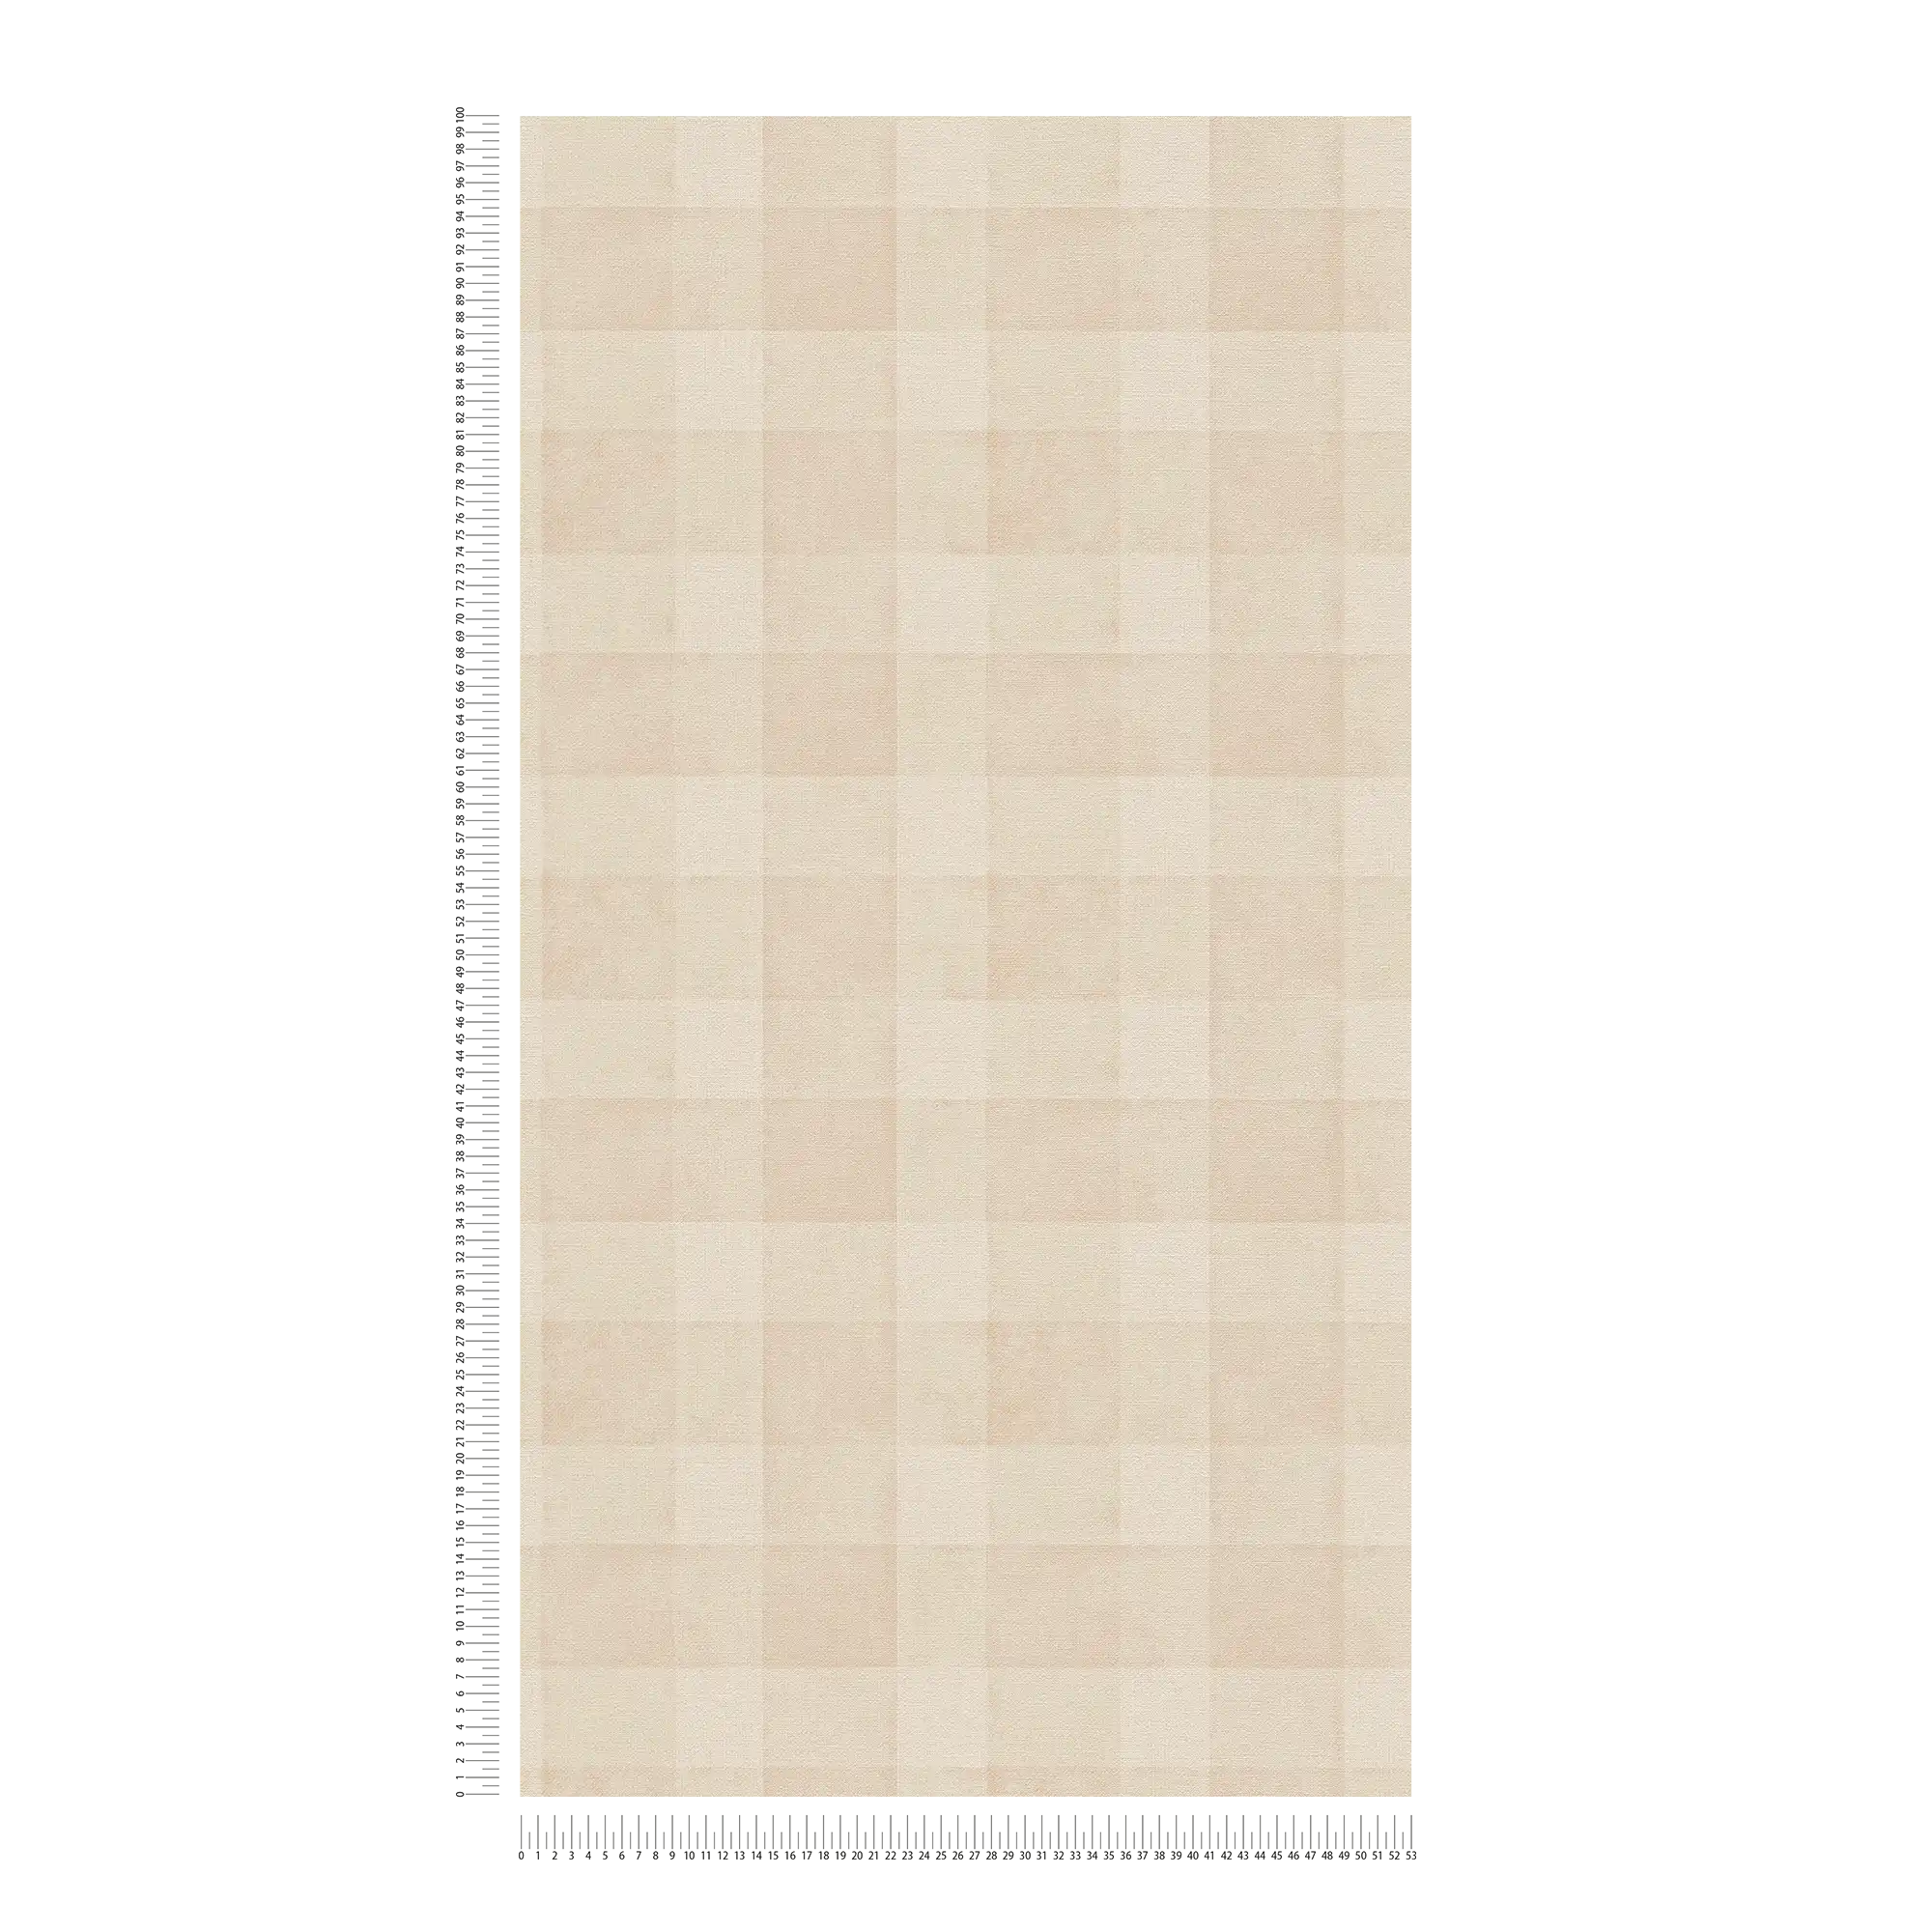             Non-woven wallpaper PVC-free check pattern with linen look - beige
        